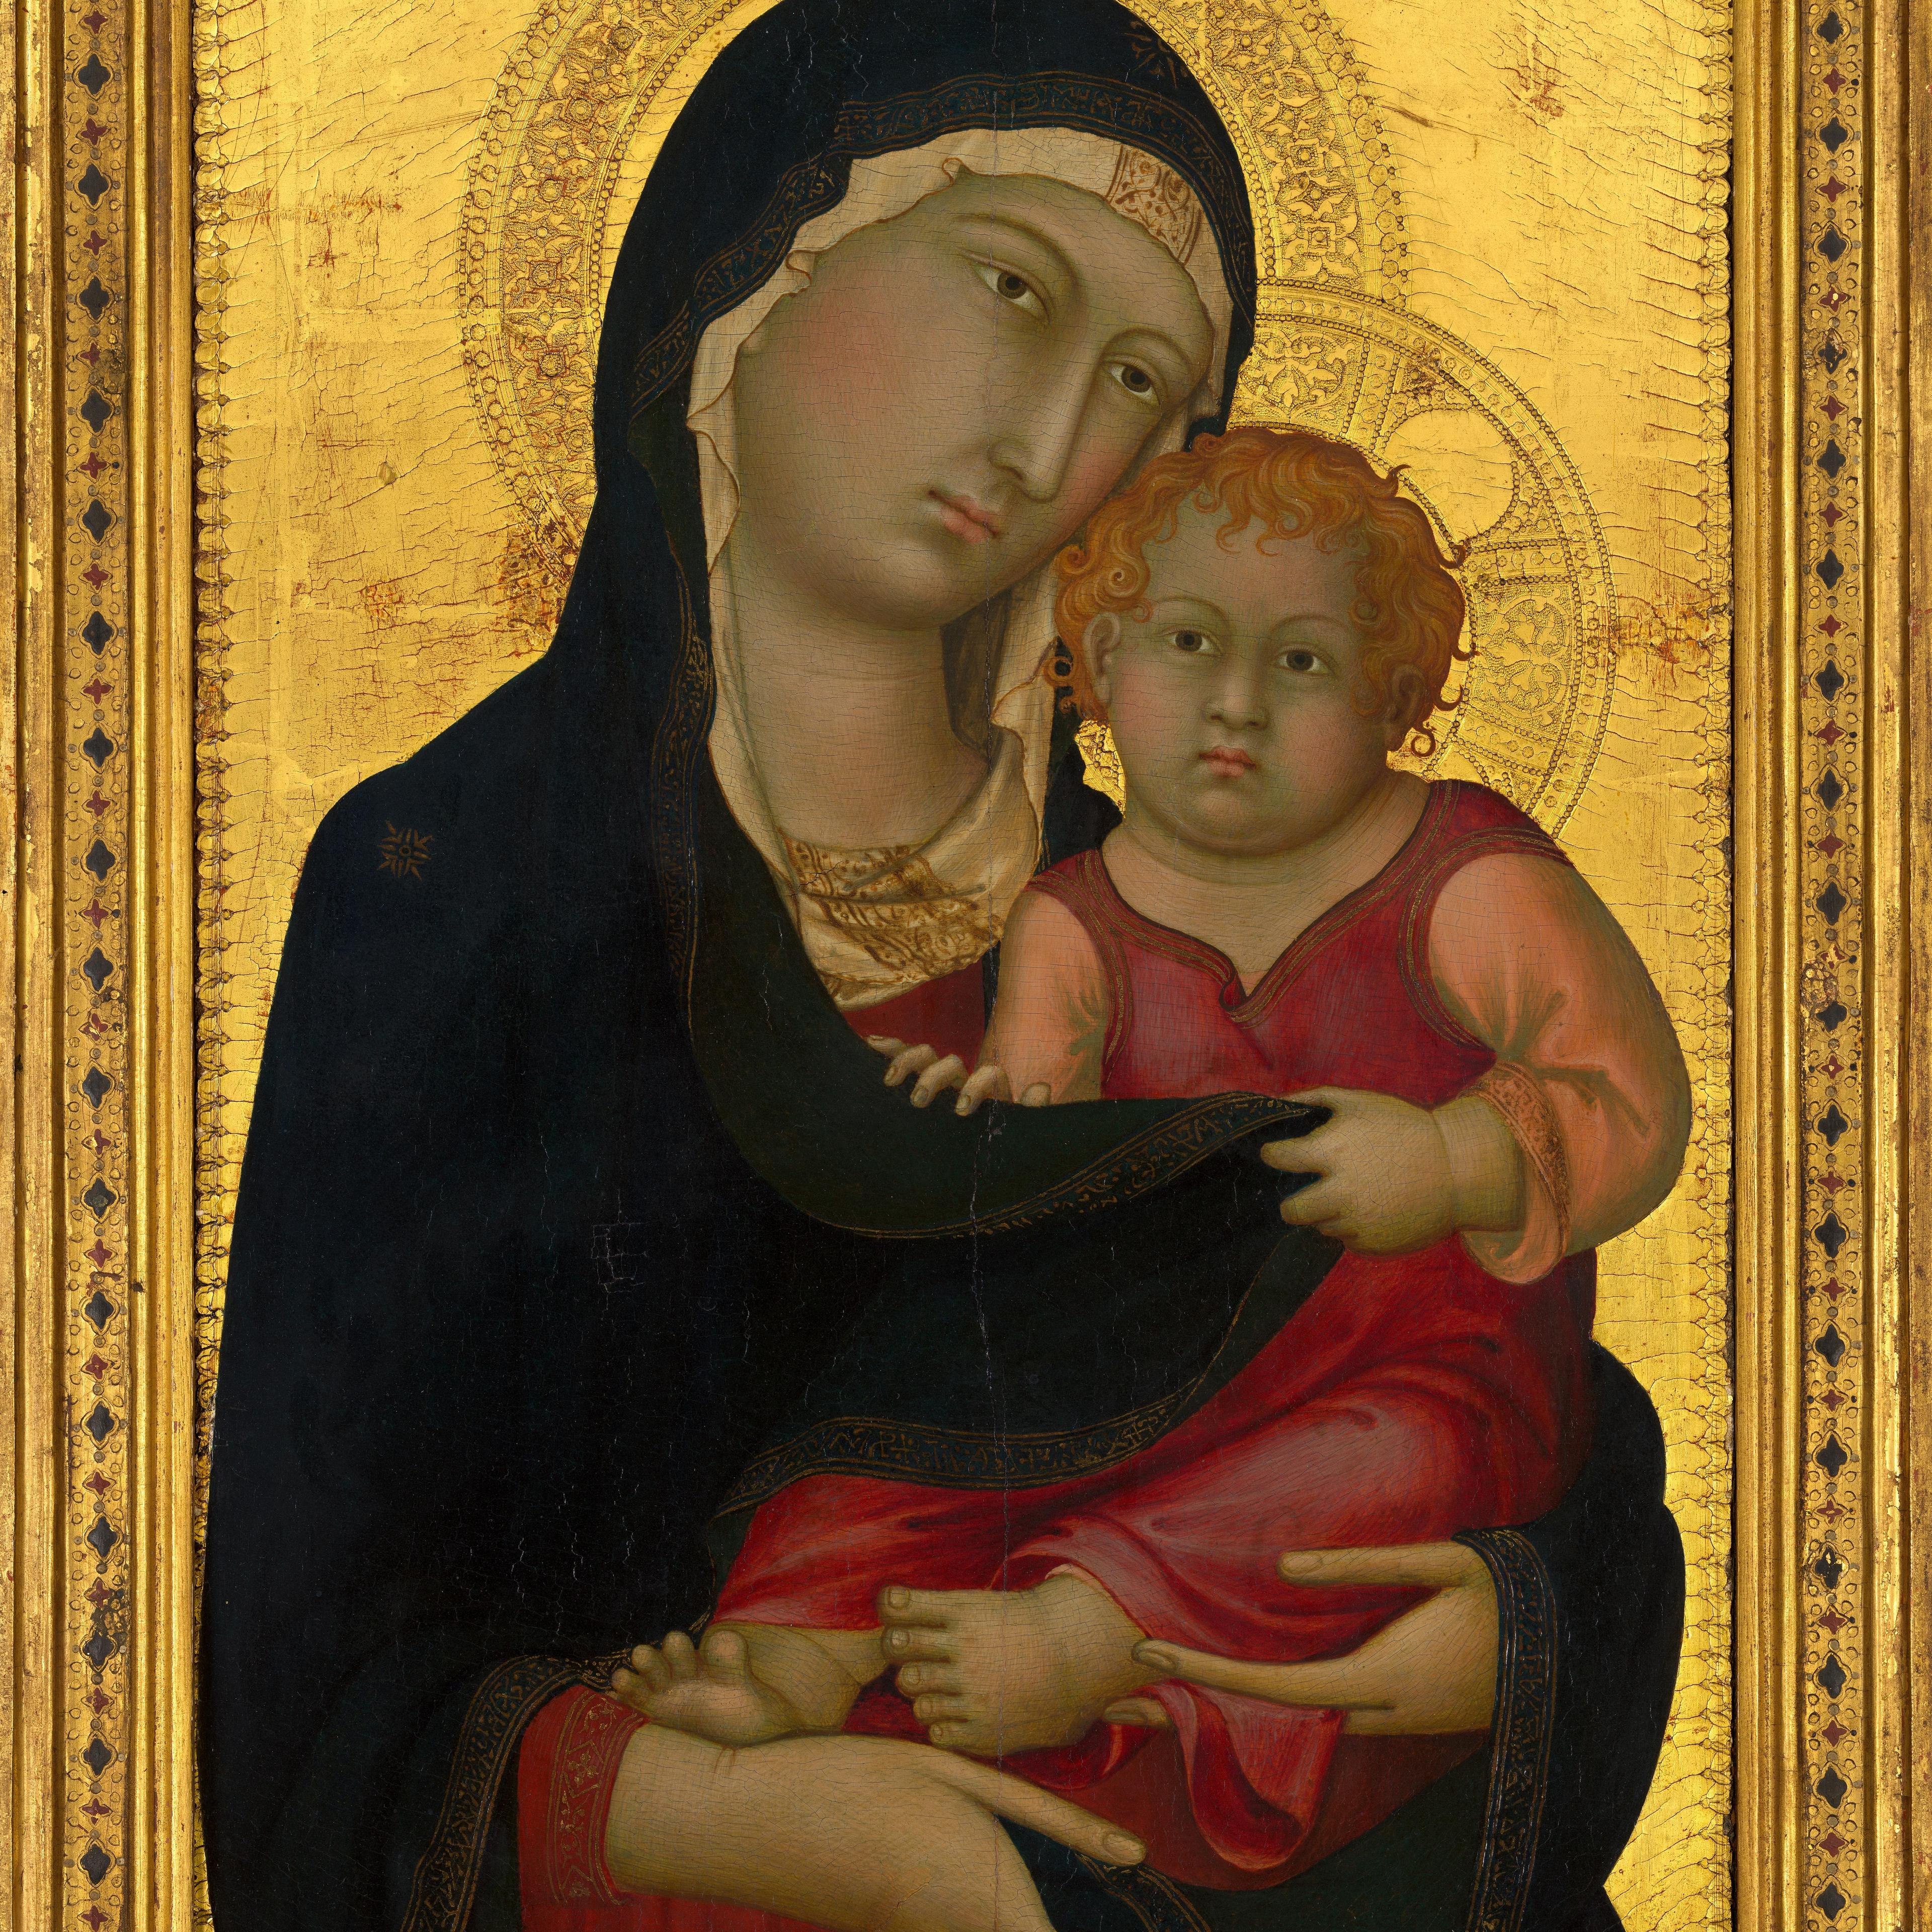 A medieval painting of the madonna and child, featuring the virgin mary in a blue mantle holding the infant jesus clad in red, set against a gold-leaf background adorned with intricate patterns.